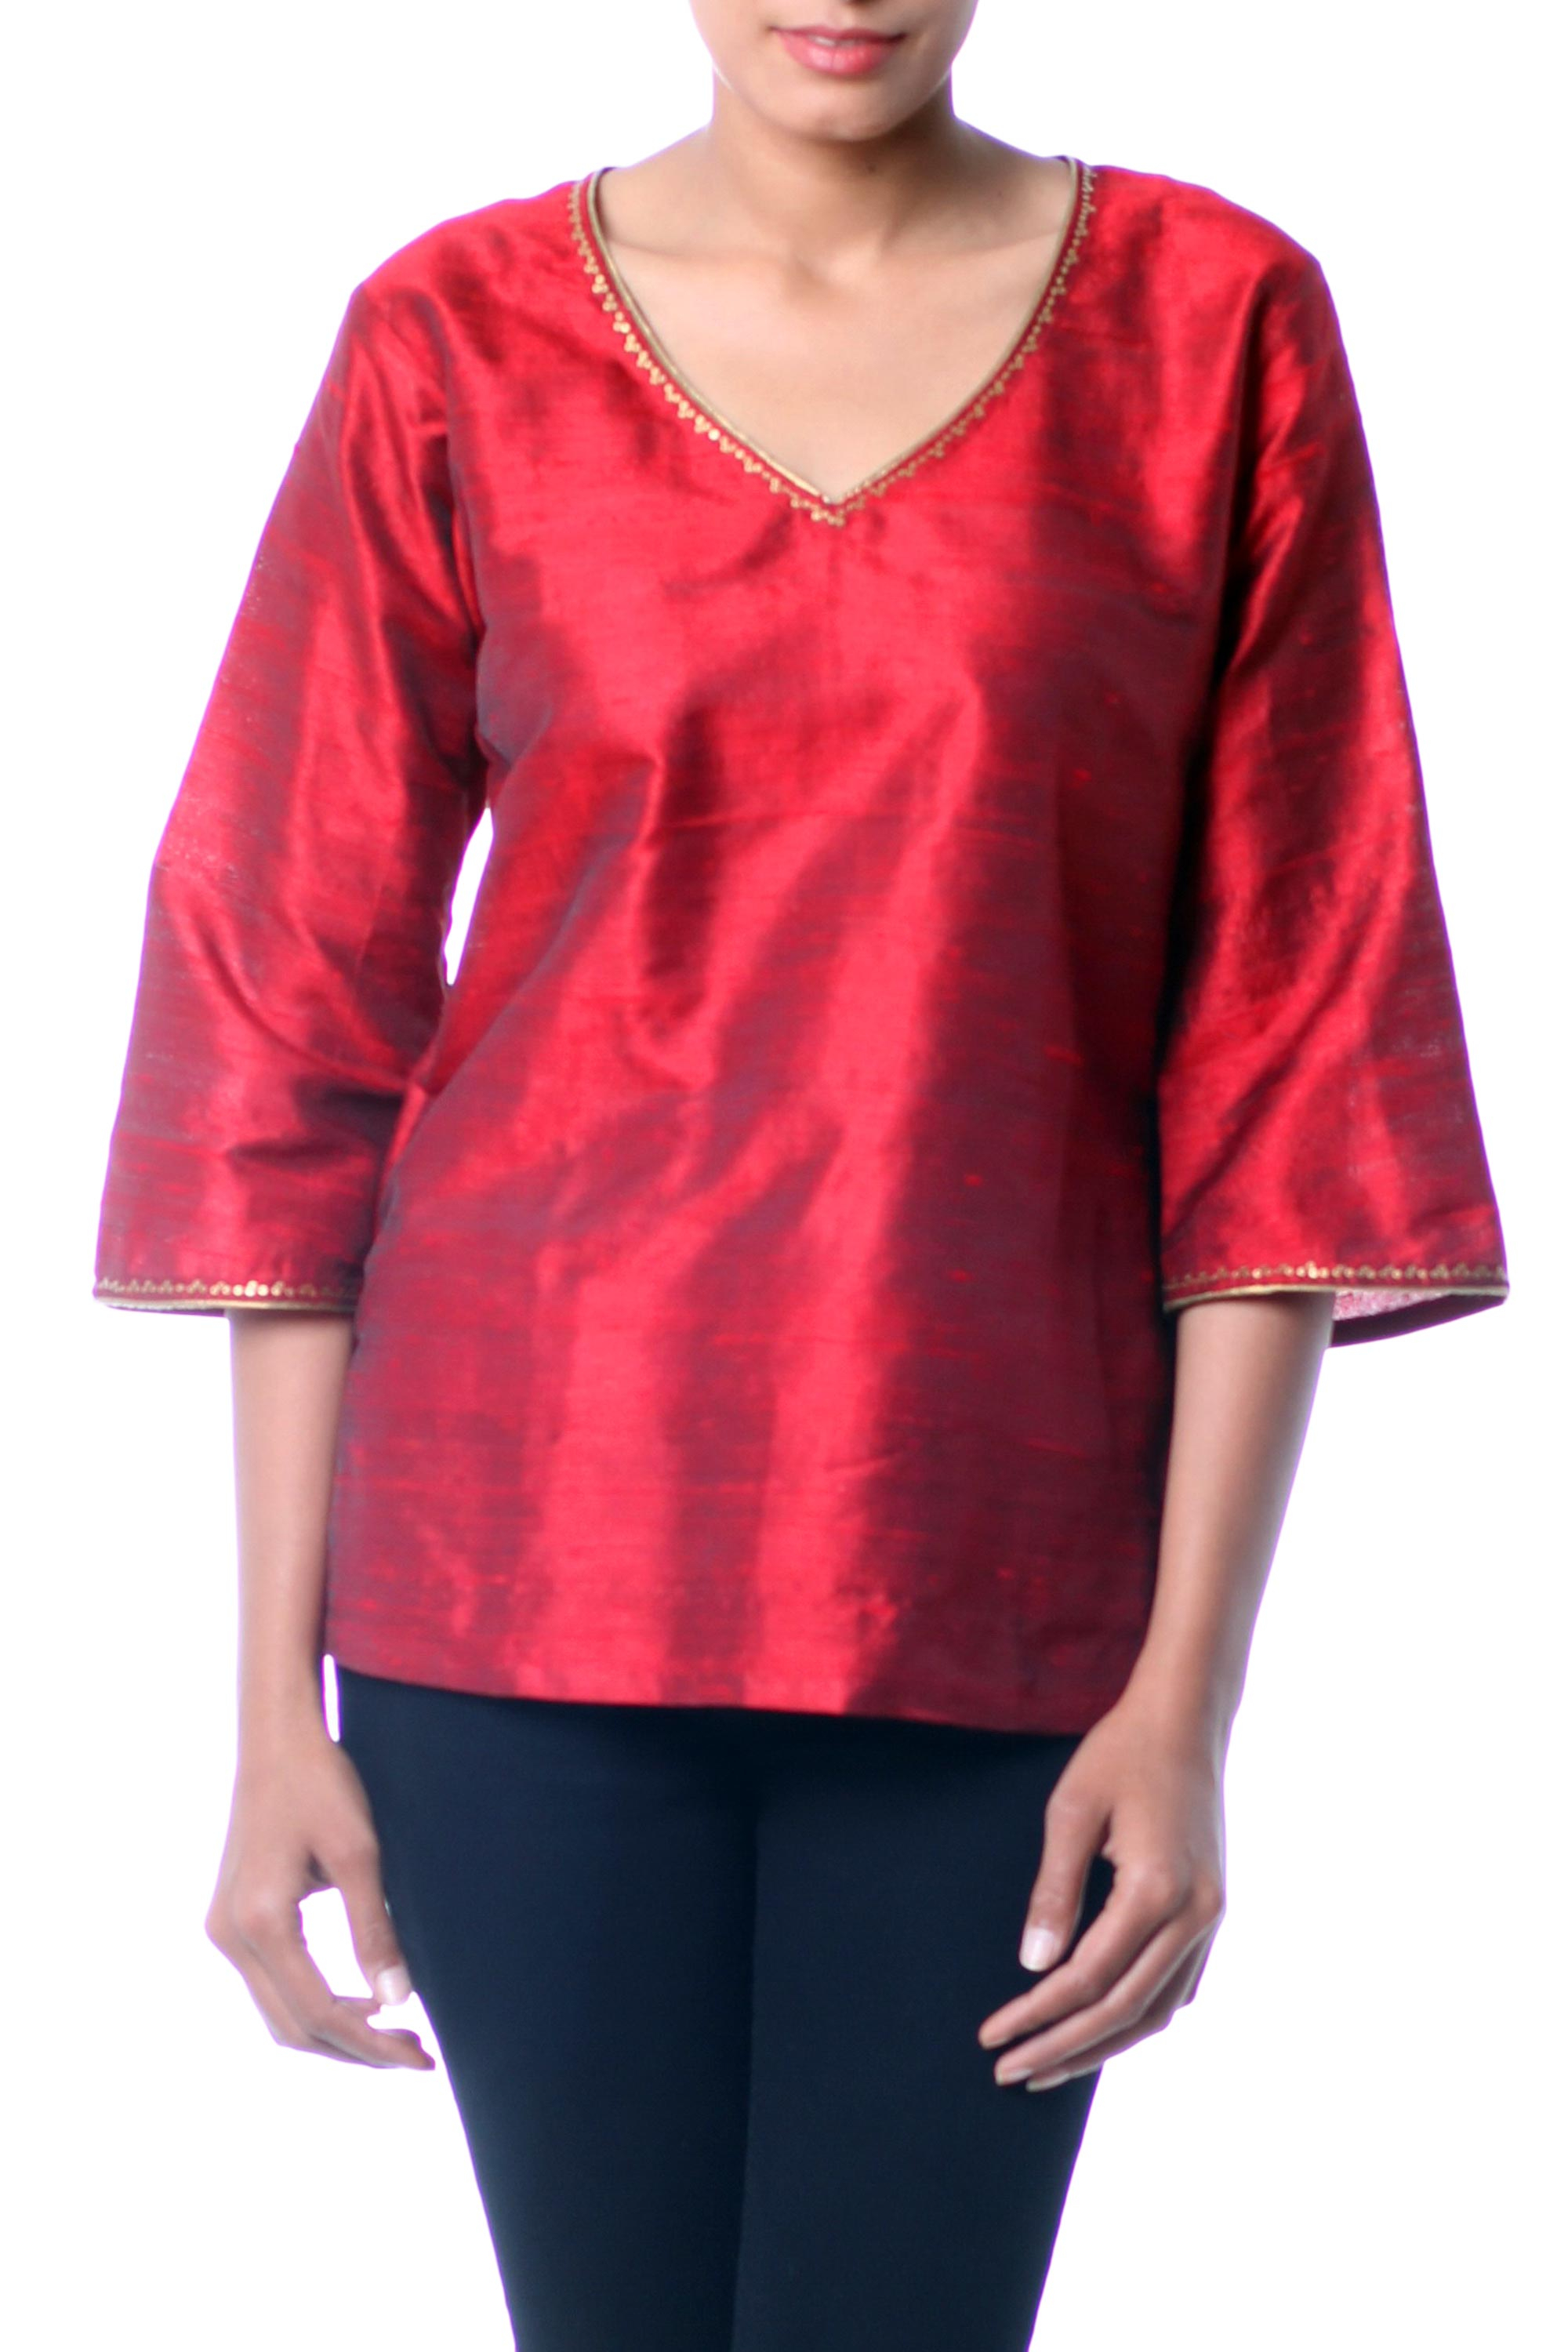 Embellished Silk Tunic Blouse From India Grand Ruby Novica 5620